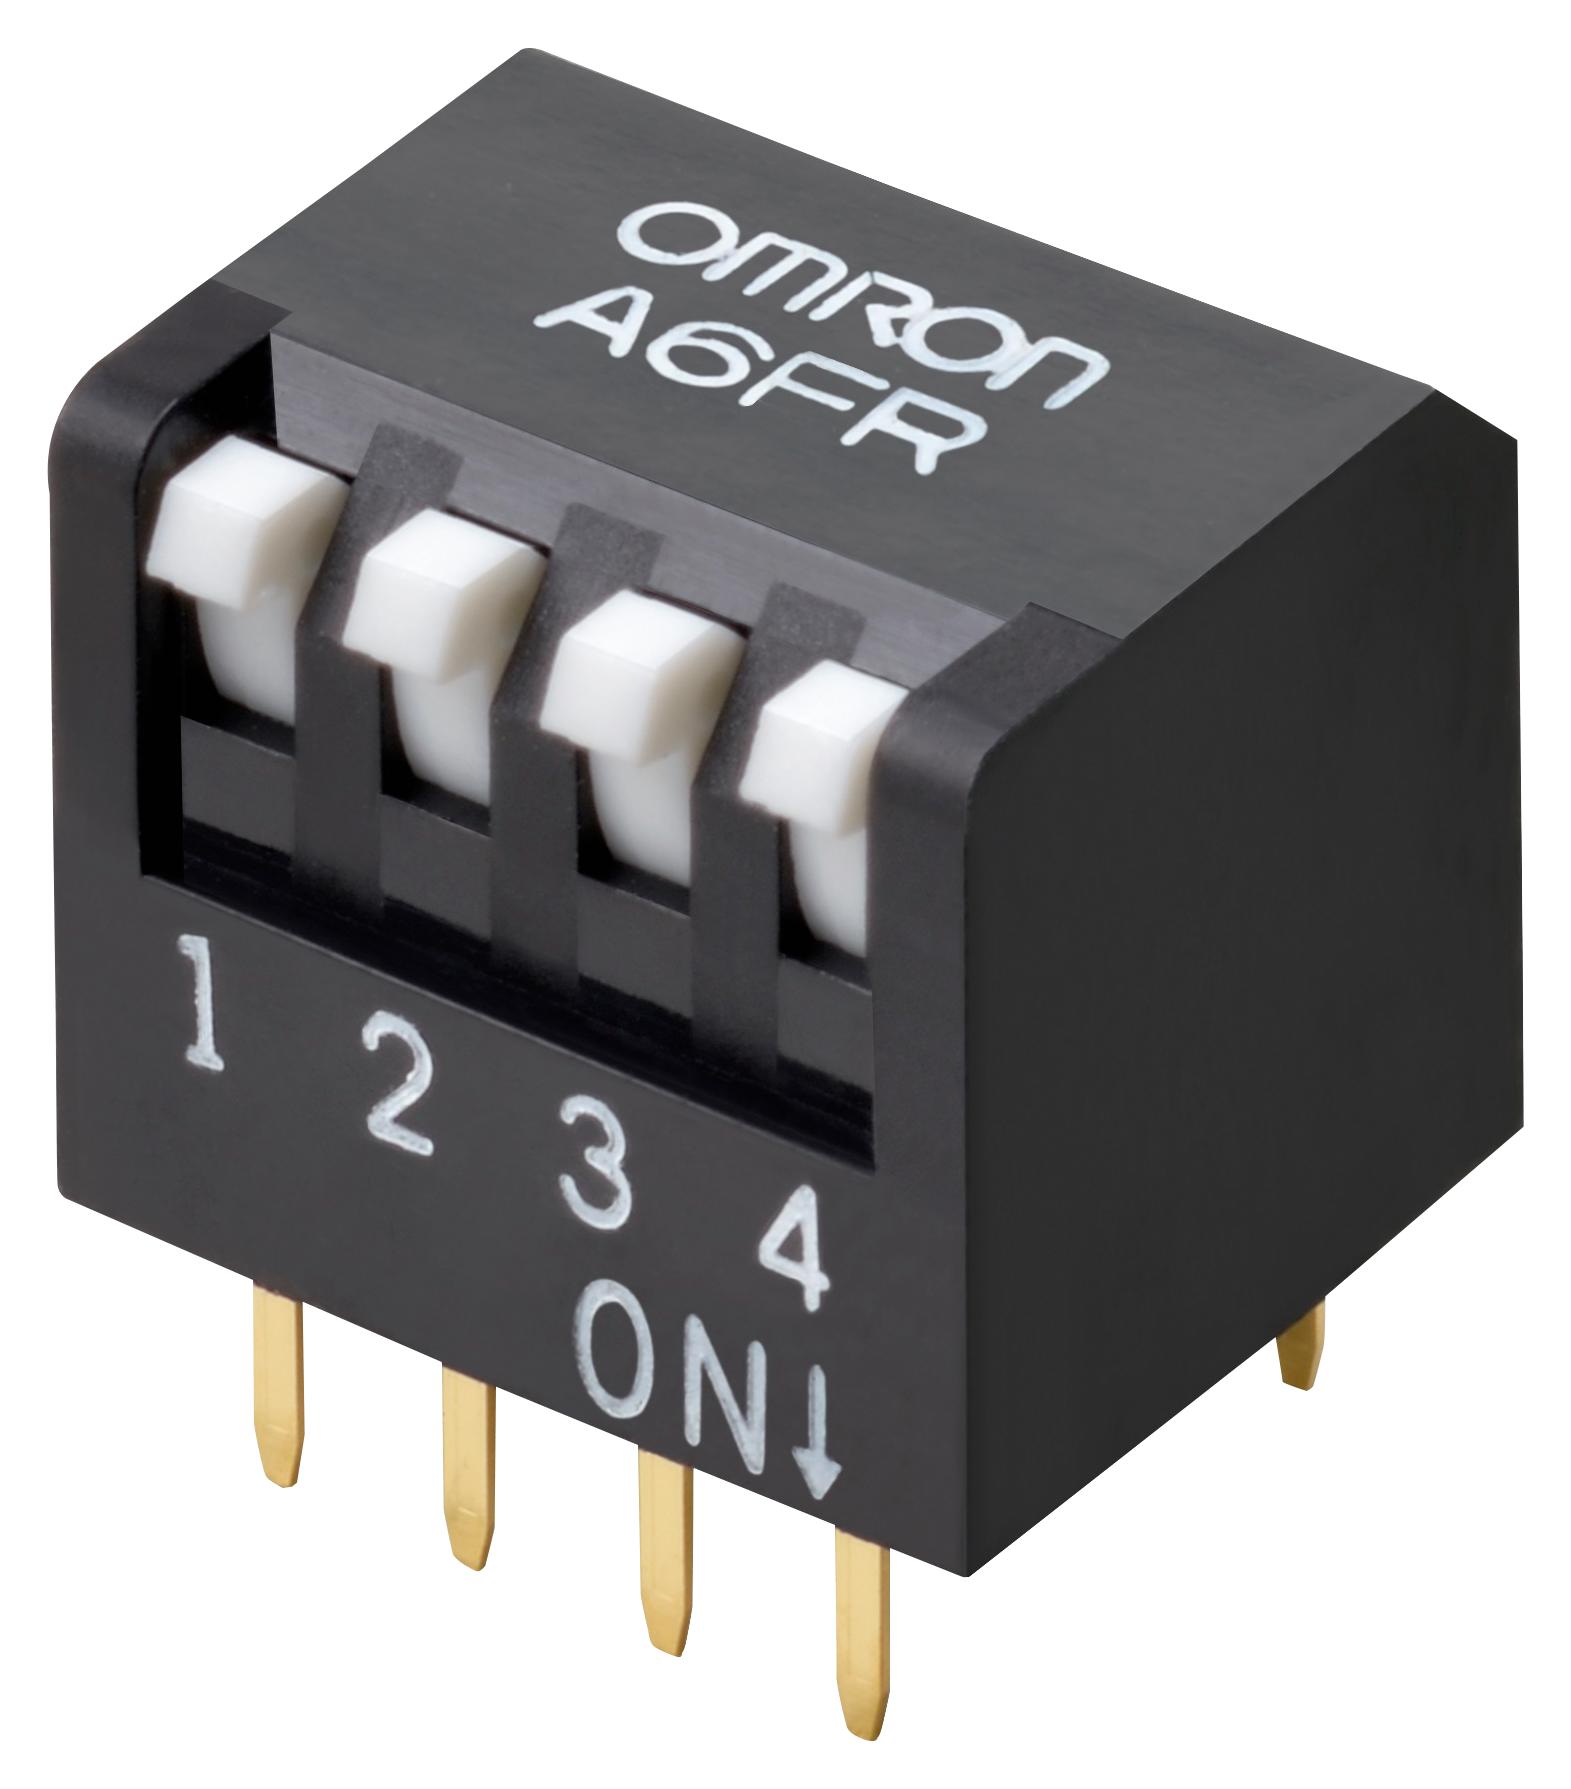 A6FR-2101 DIP SWITCH, 2POS, SPST, PIANO KEY, TH OMRON